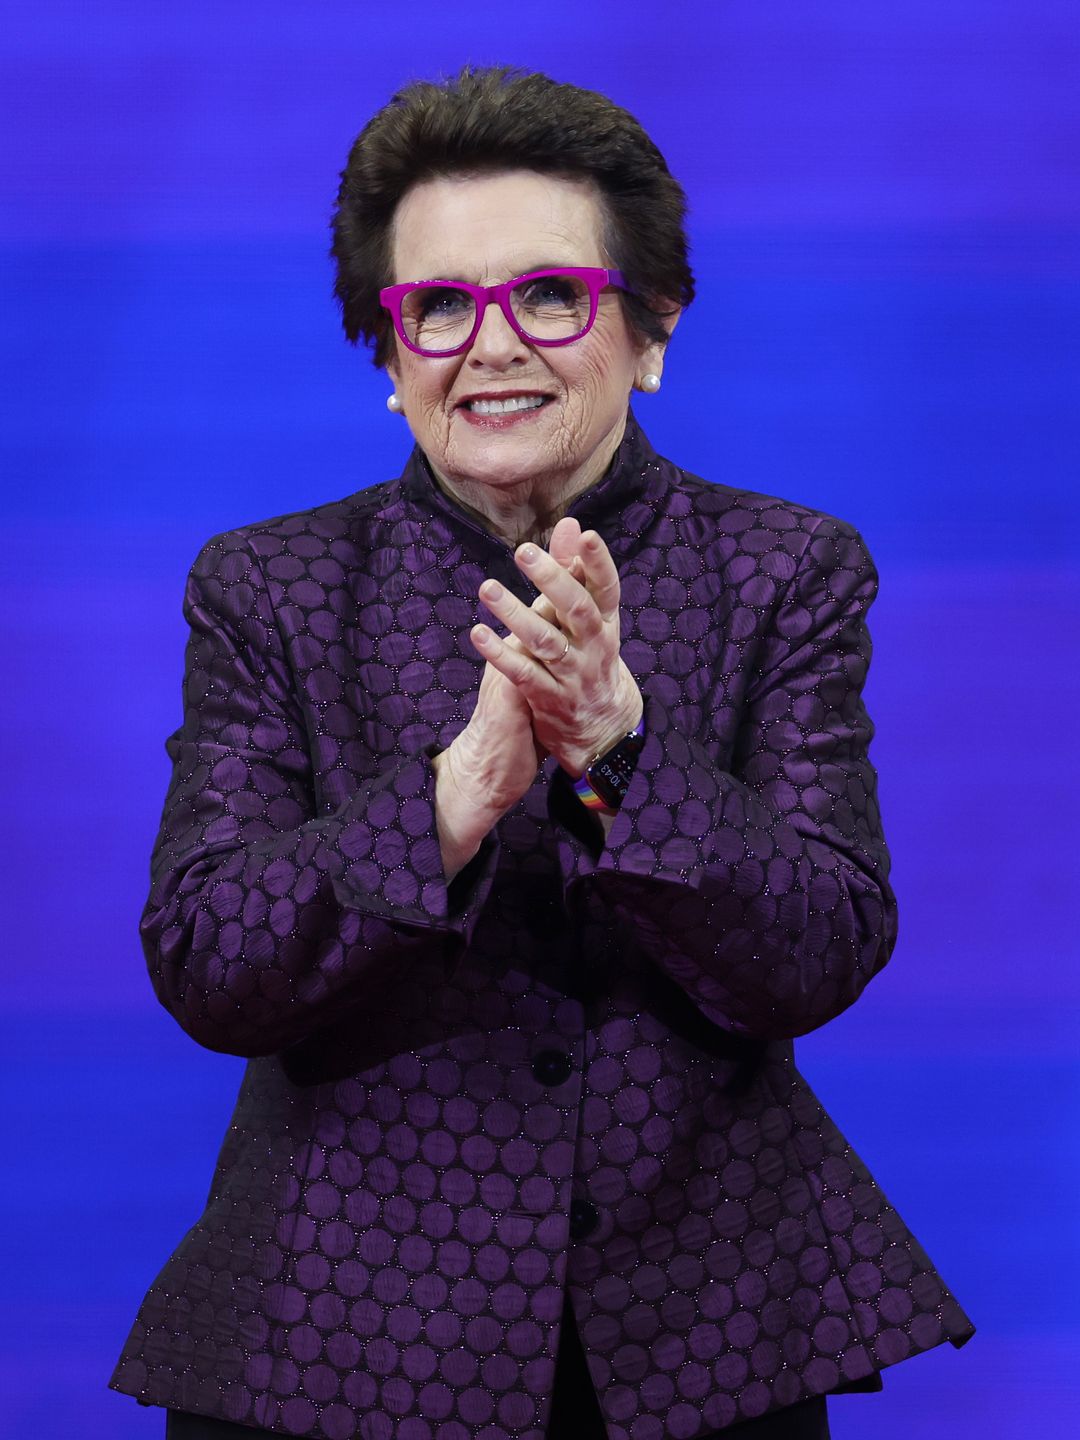 Billie Jean King in a purple jacket at the US Open 